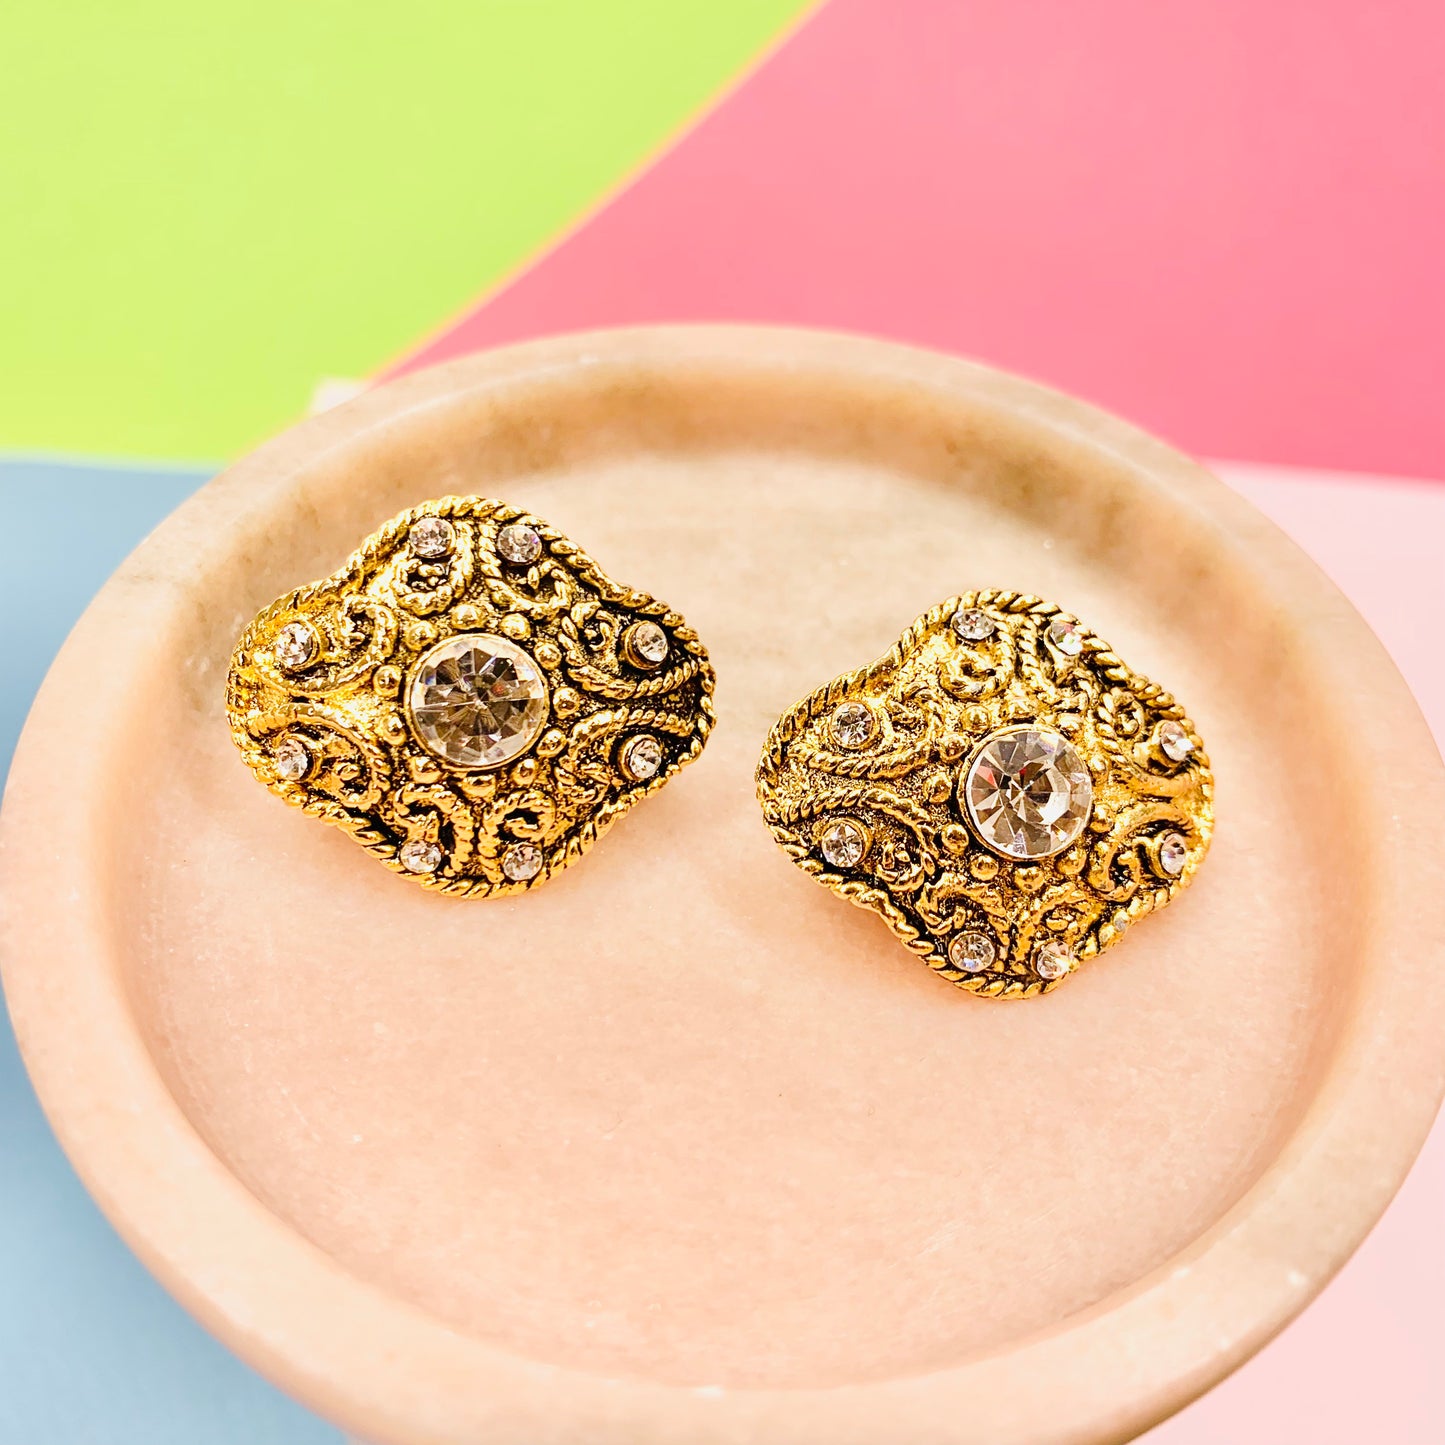 Extremely rare 1950s brass gilt clip on button earrings with clear rhinestones and filigree